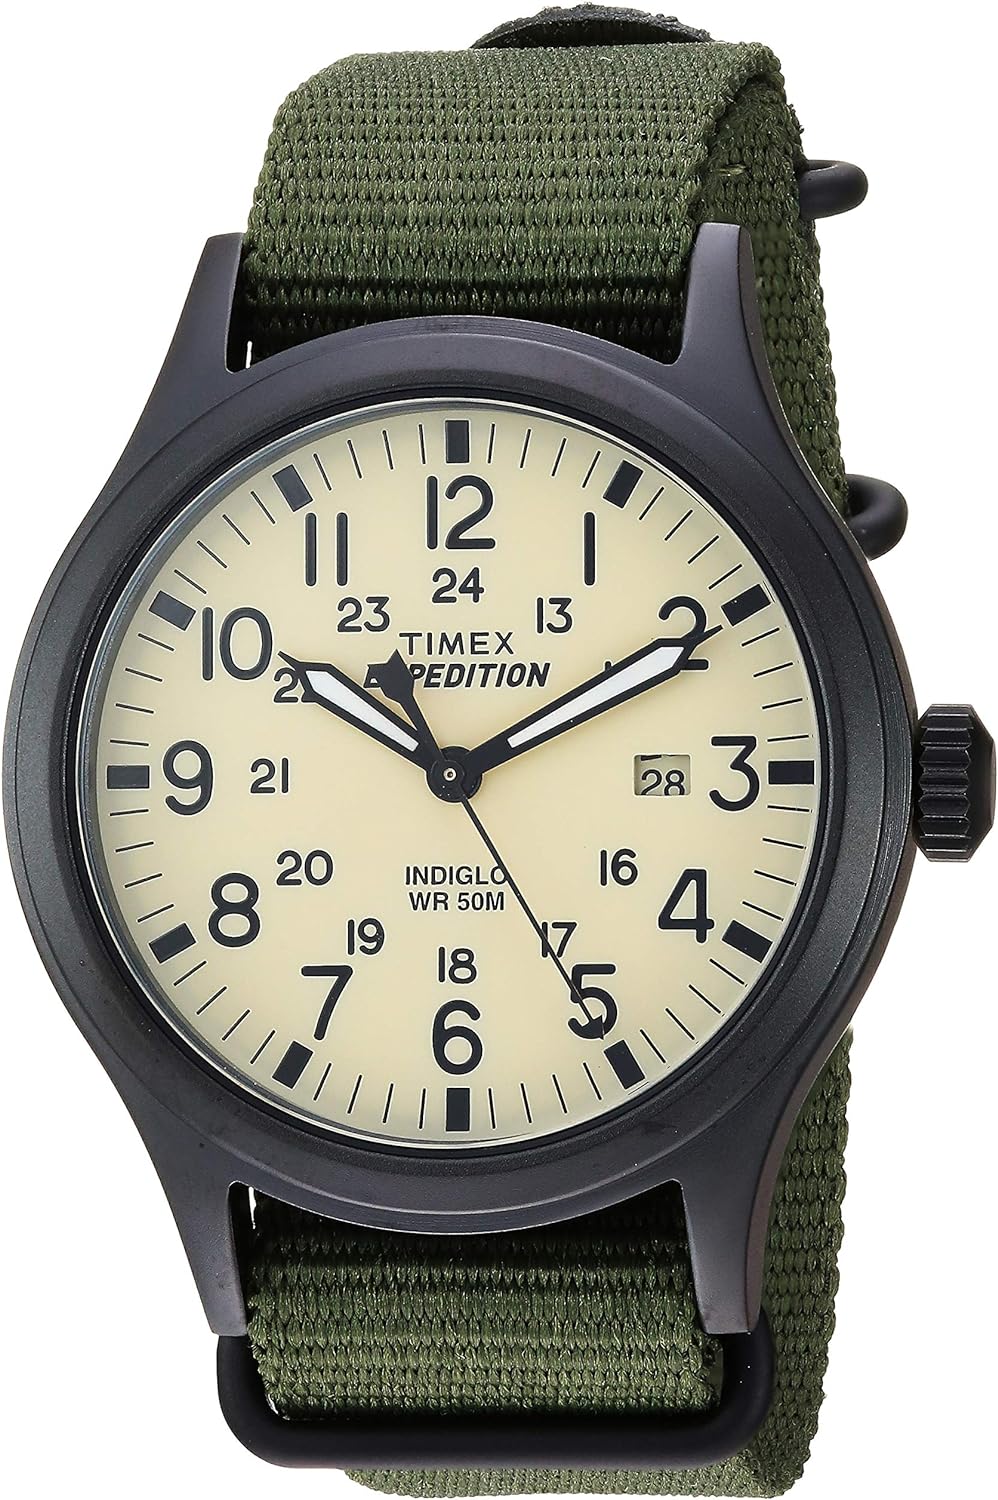 Buy the Timex Men’s Expedition Scout 40mm Watch at Best Price